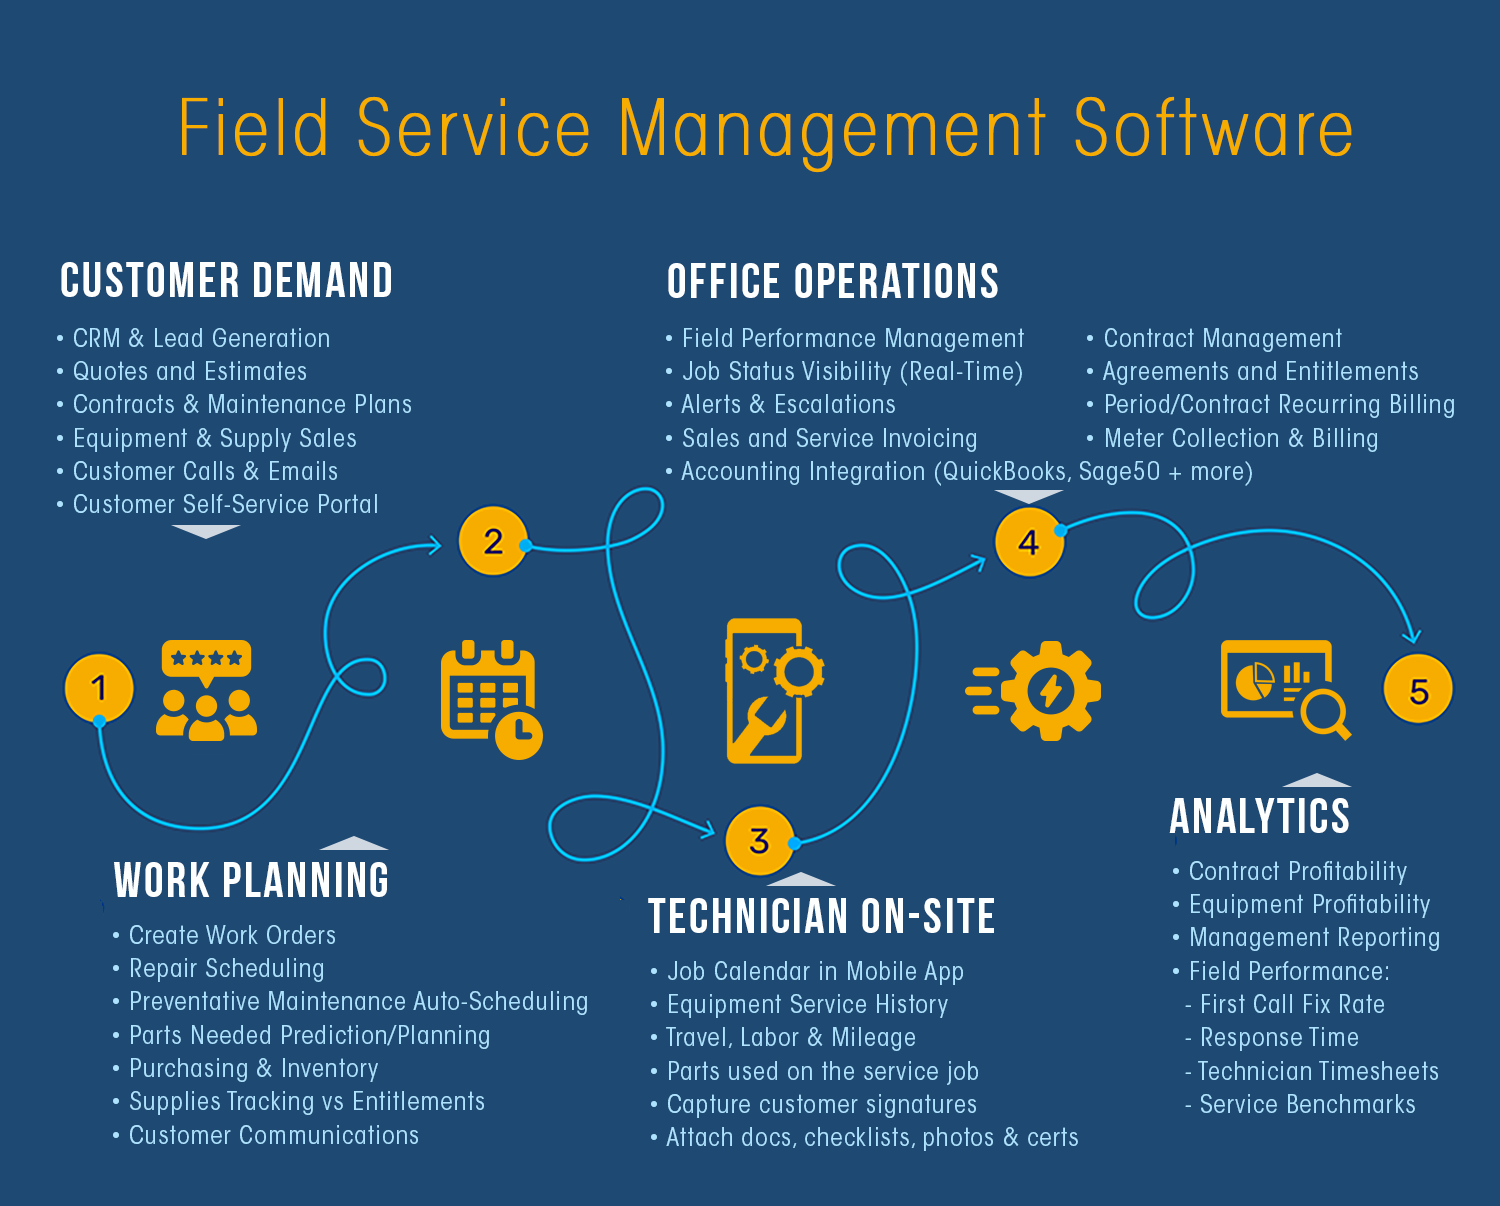 Field Service Software Workflow and Features